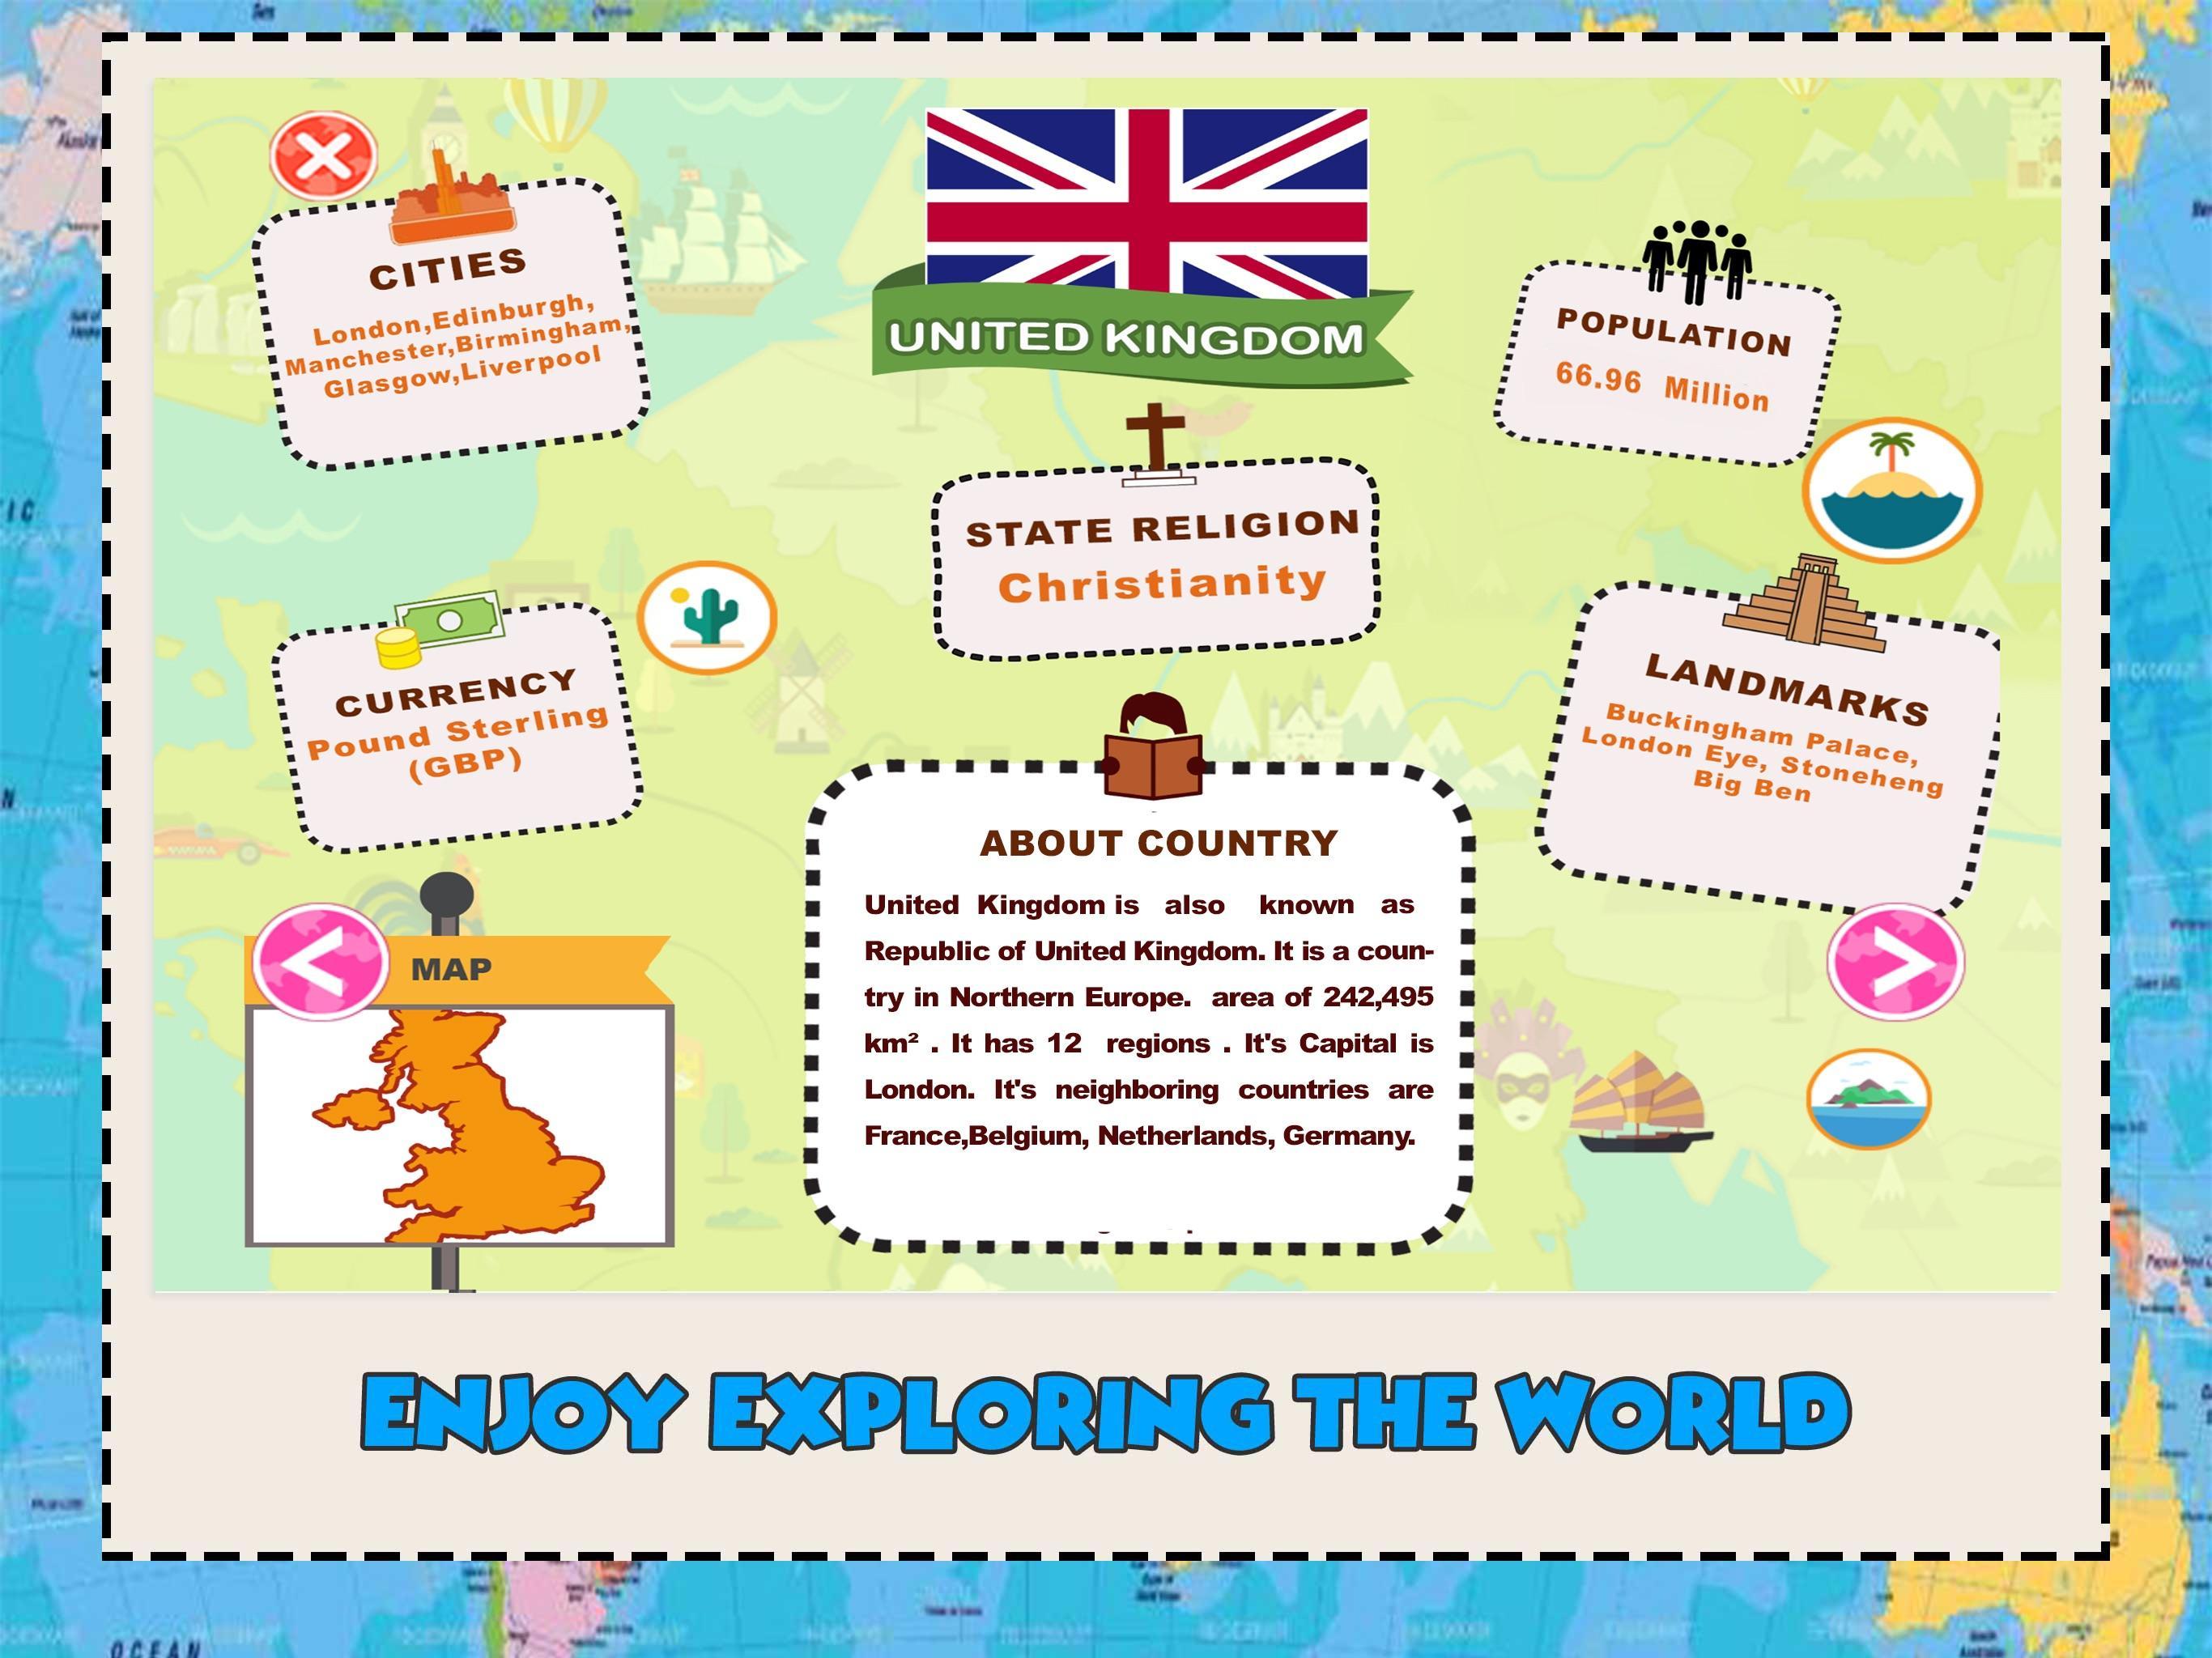 World Geography Games For Kids - Learn Countries 2.5 Screenshot 2